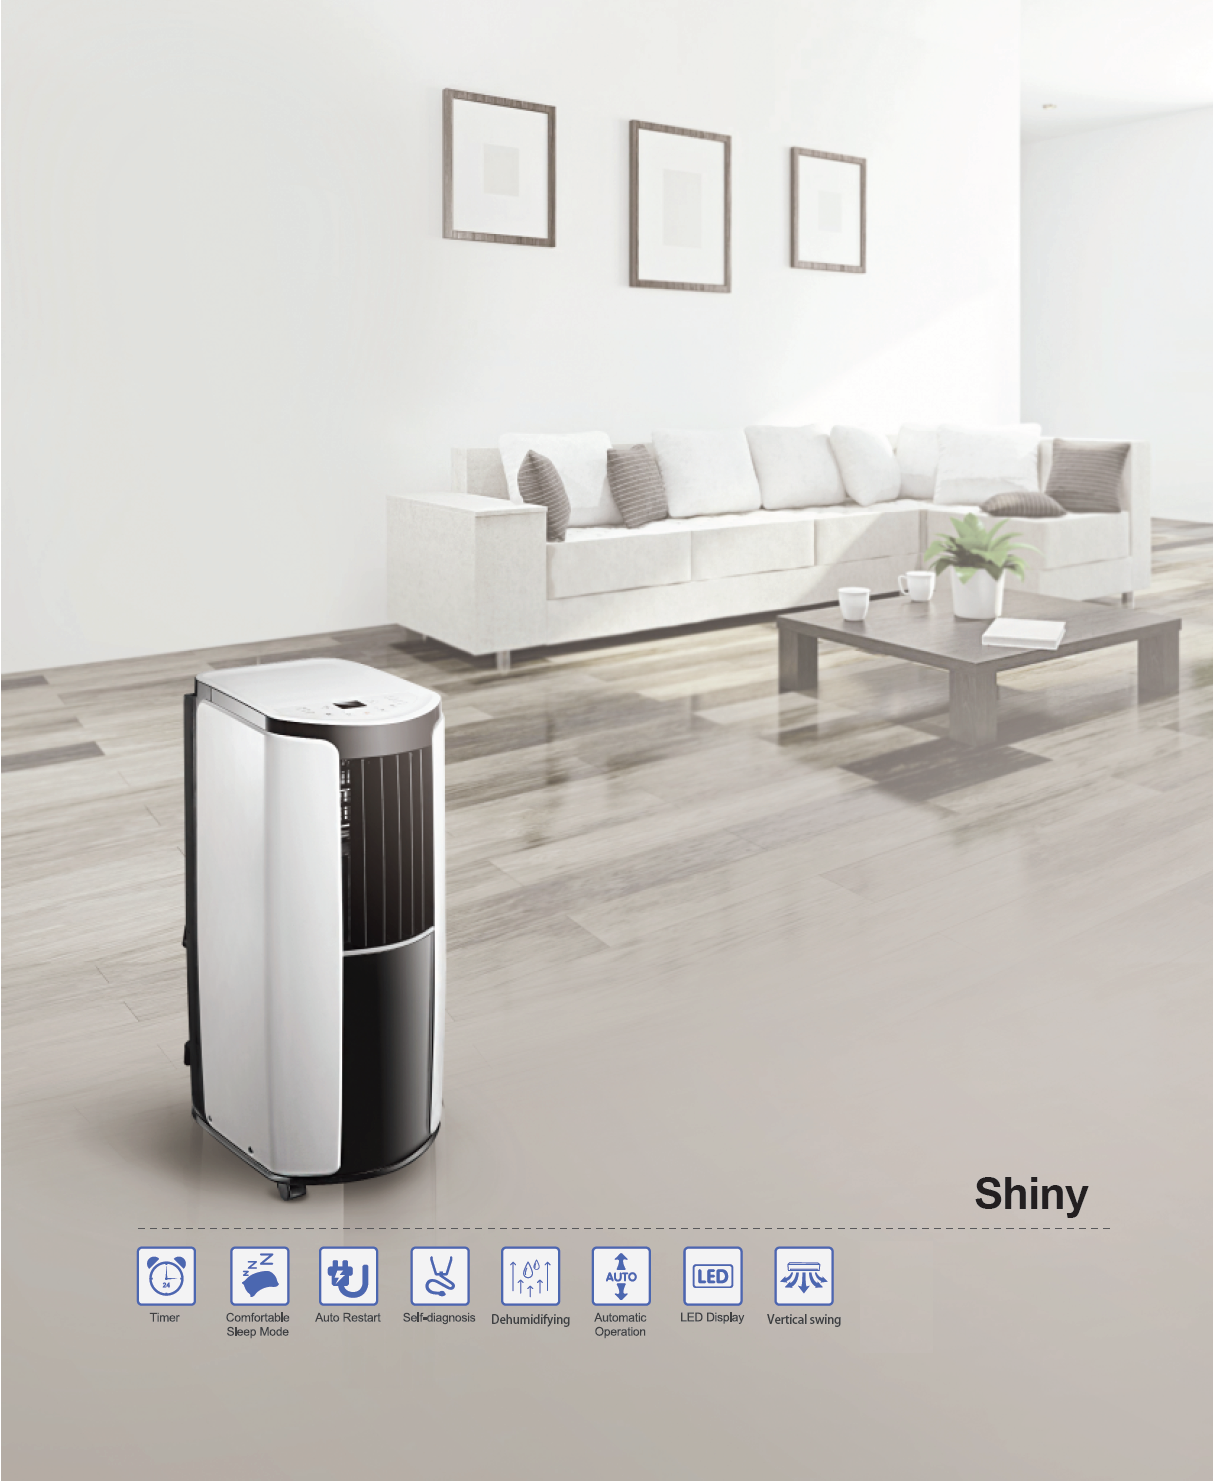 gree portable air conditioner review